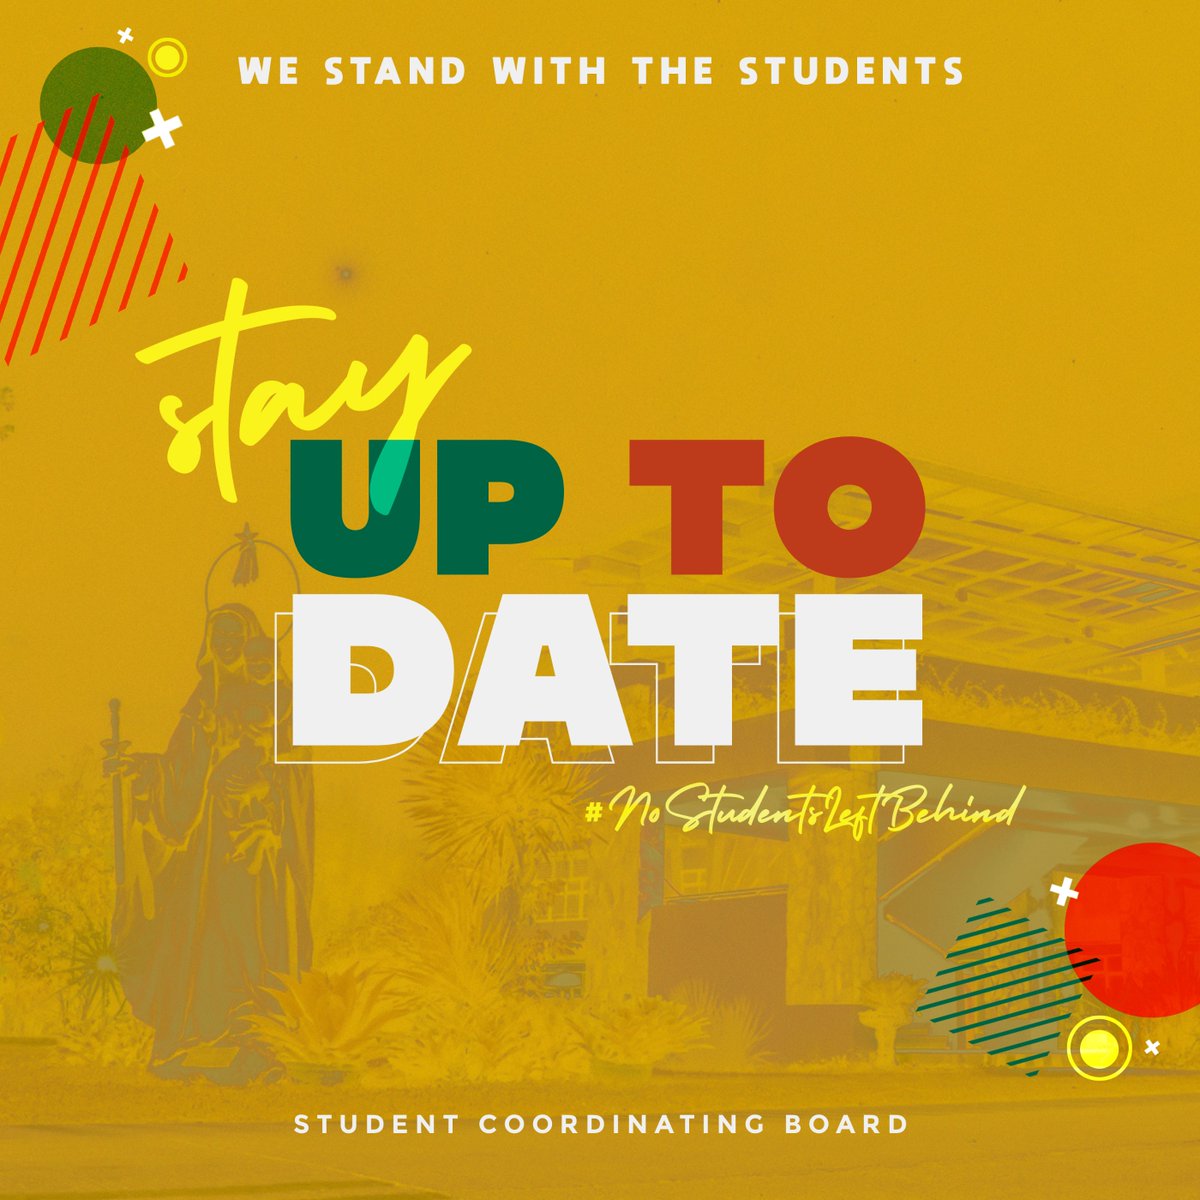 Together we will stand and see the future ahead of us! Stay up to date and follow our thread for transparent information that will aid your concerns. True to our word, no voice is left unnoticed.  #NoStudentsLeftBehind